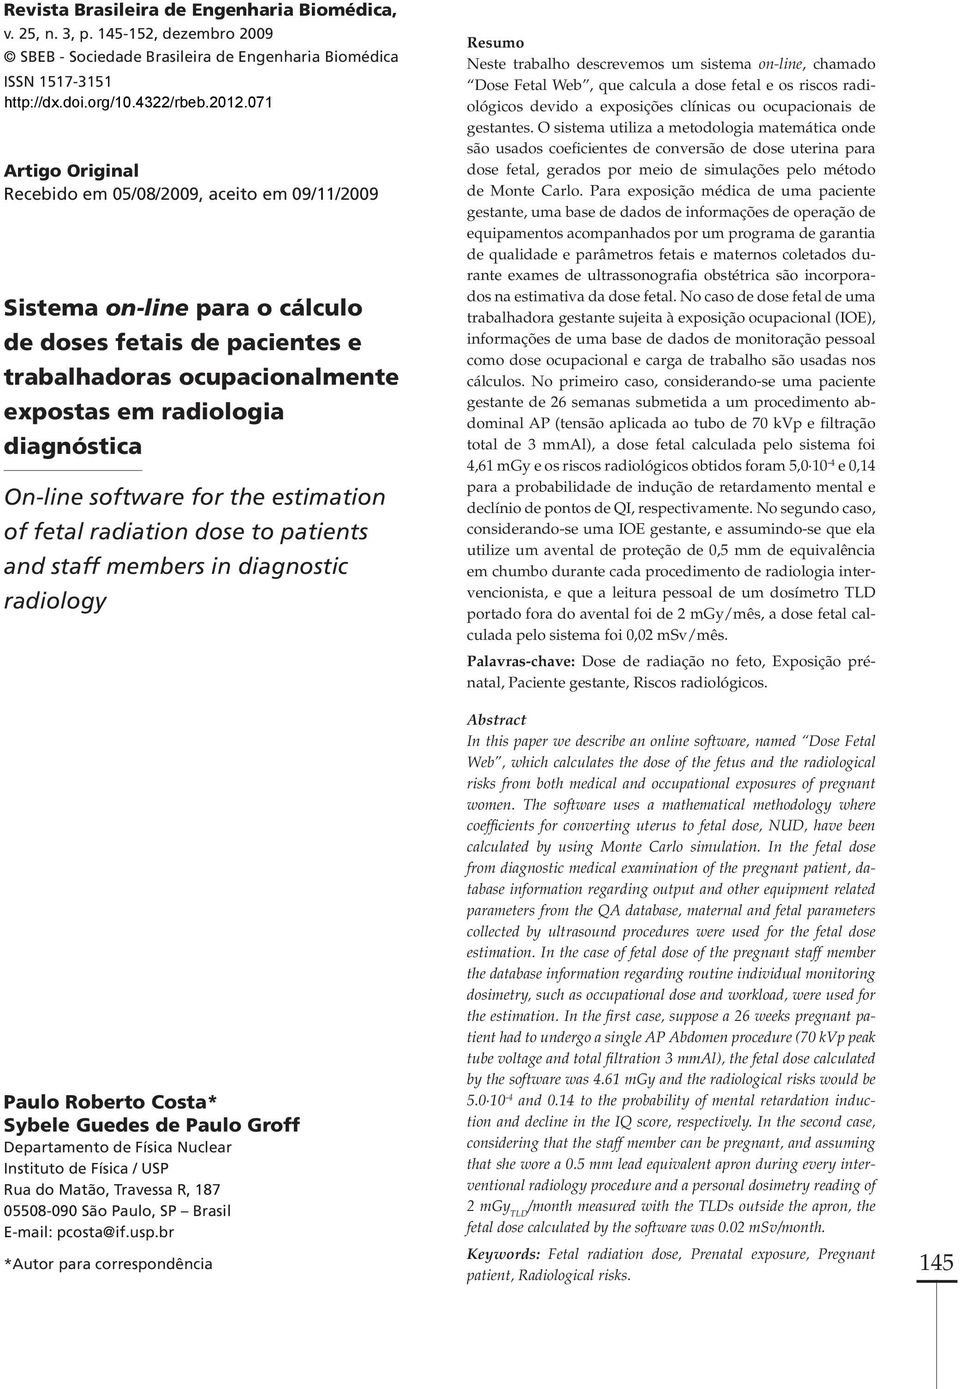 On-line software for the estimation of fetal radiation dose to patients and staff members in diagnostic radiology Paulo Roberto Costa* Sybele Guedes de Paulo Groff Departamento de Física Nuclear